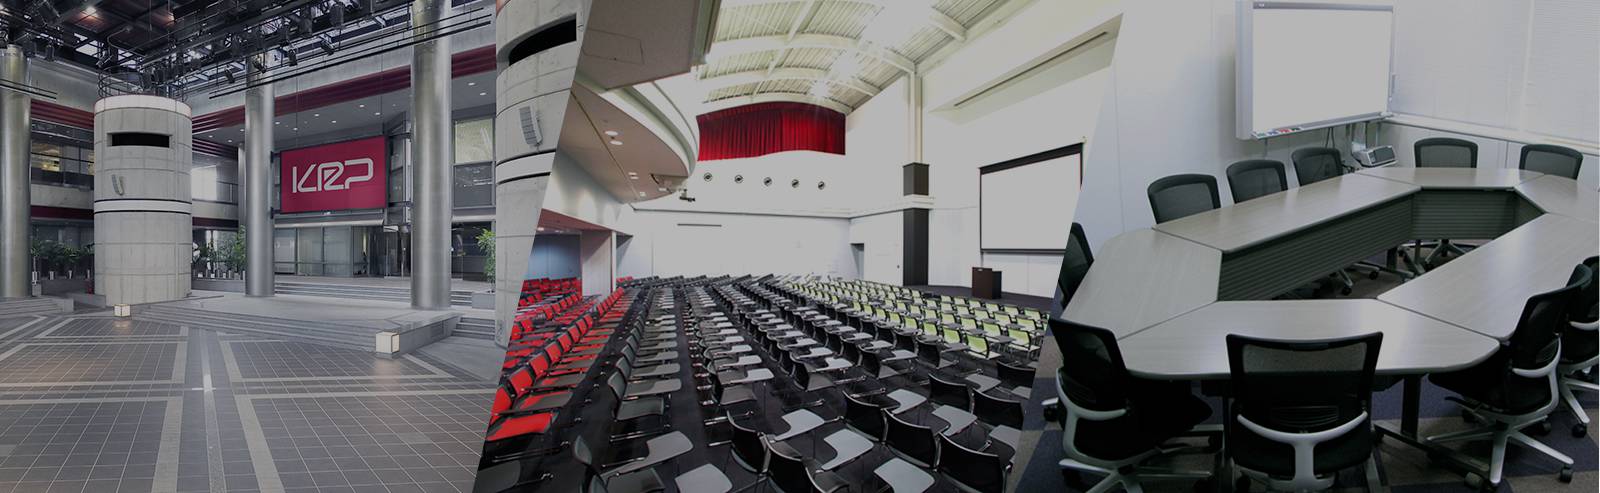 Room sizes range from 30m2 to 365m2, ready for conferences and event of various scales.